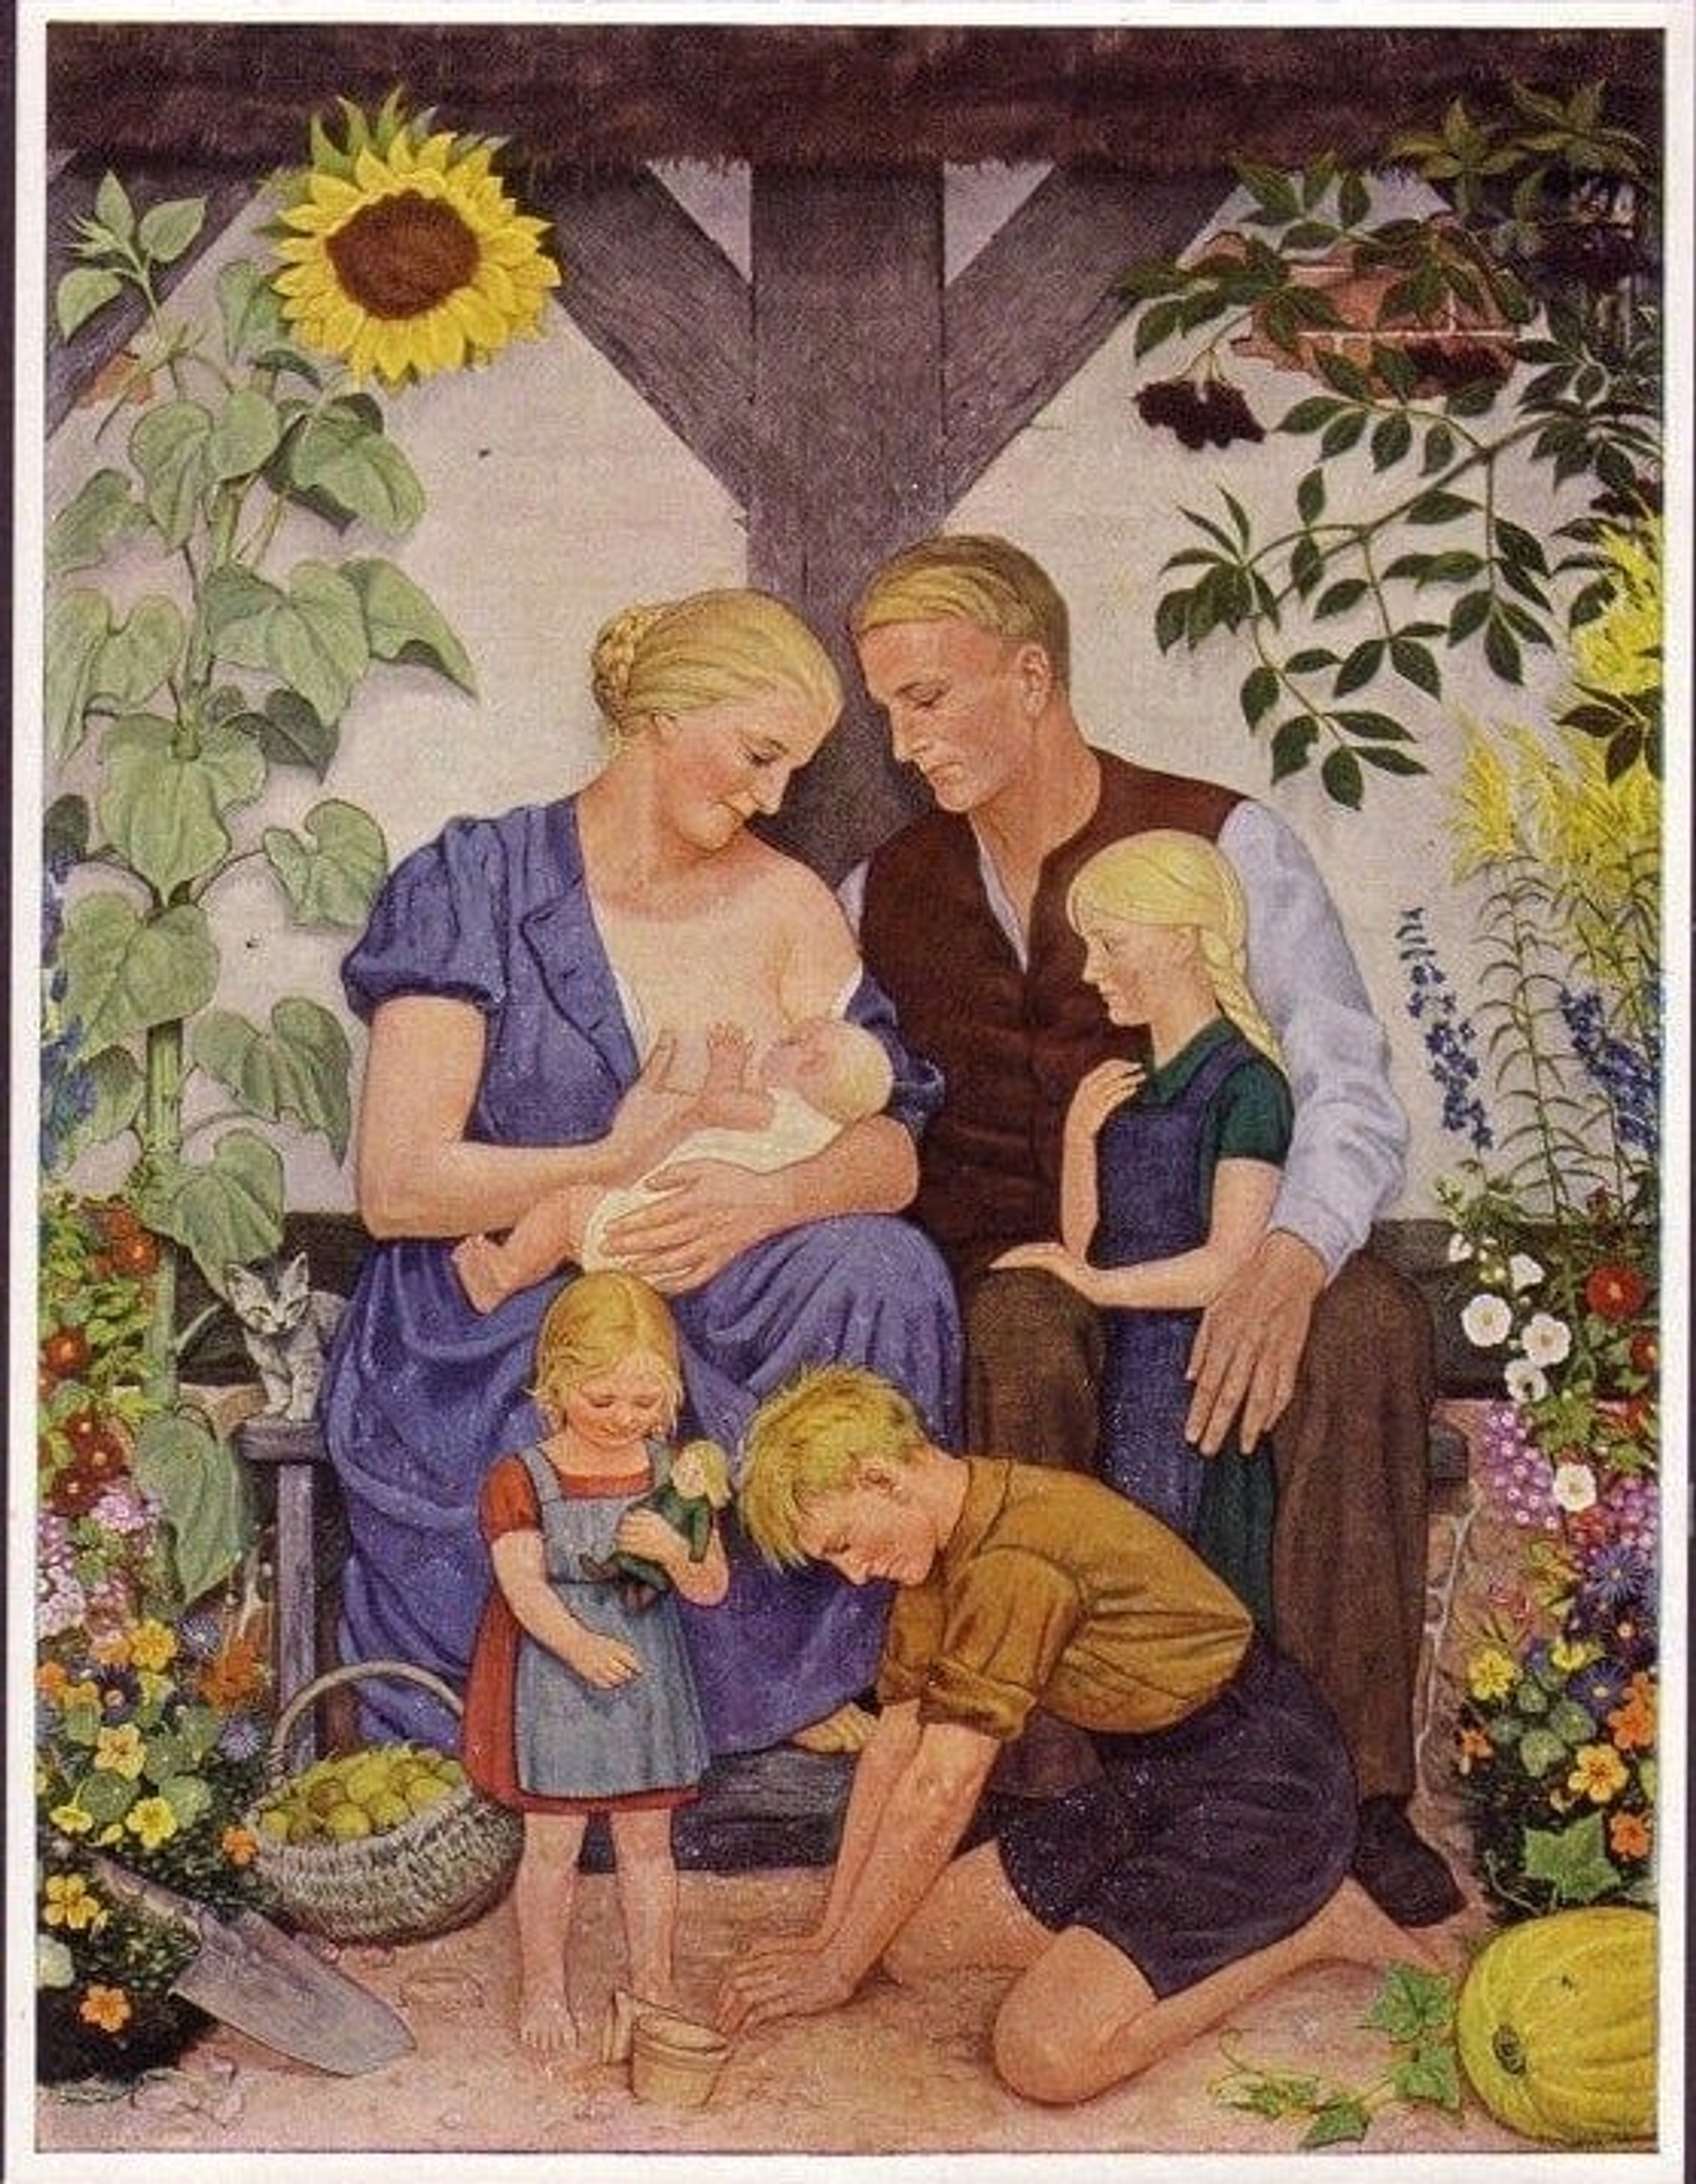 Wolfgang_Willrich_(1897-1948)_Familienbildniss_(Family)_GDK_1938_(1939_reproduction)_Third_Reich_racial_propaganda_No_known_copyright_restrictions